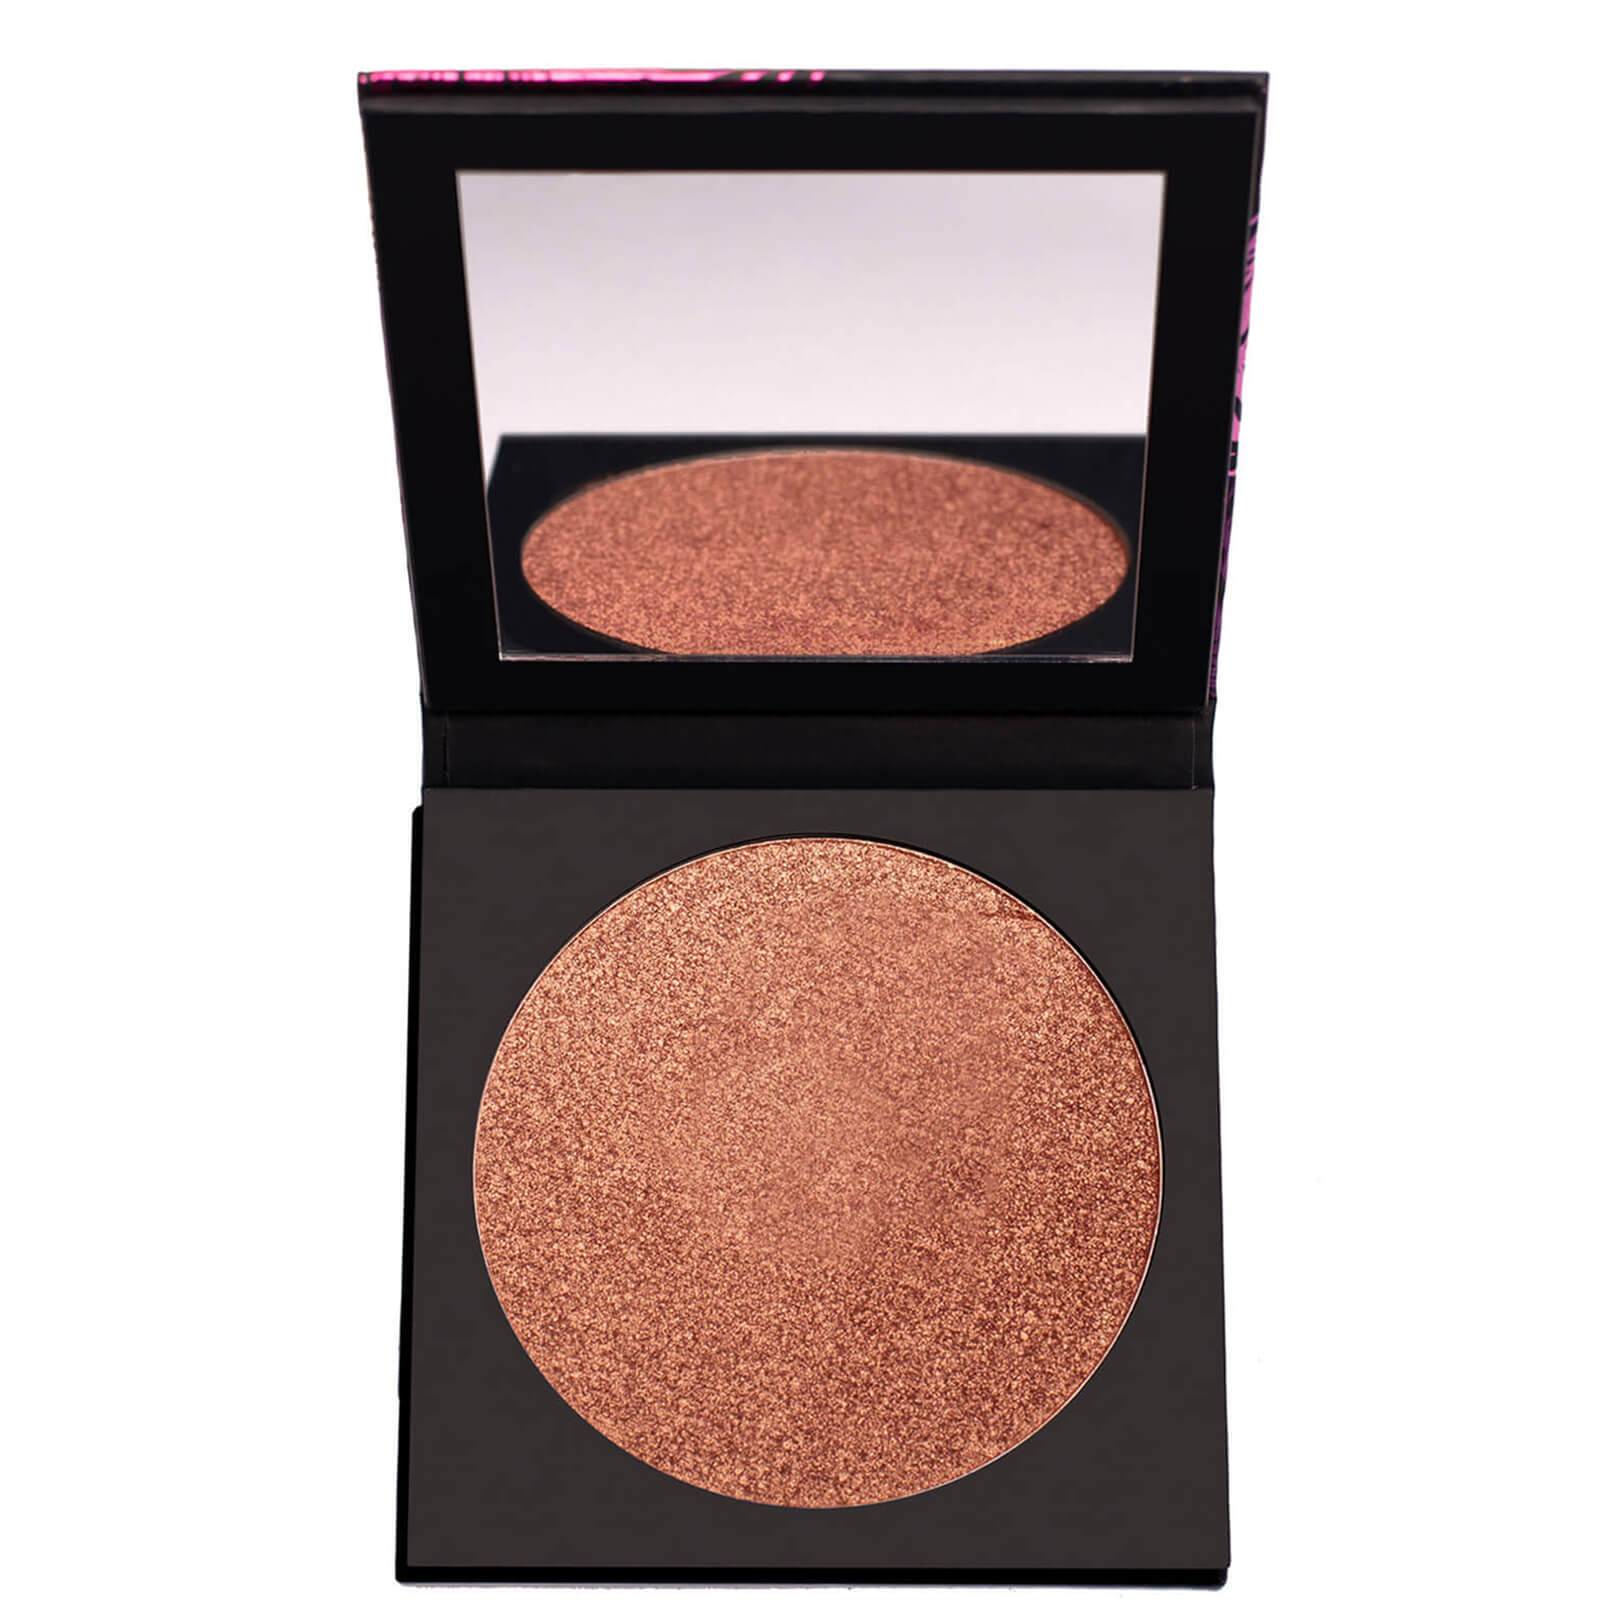 UOMA Beauty Black Magic Carnival Bronze and Highlighter - Notting Hill von UOMA